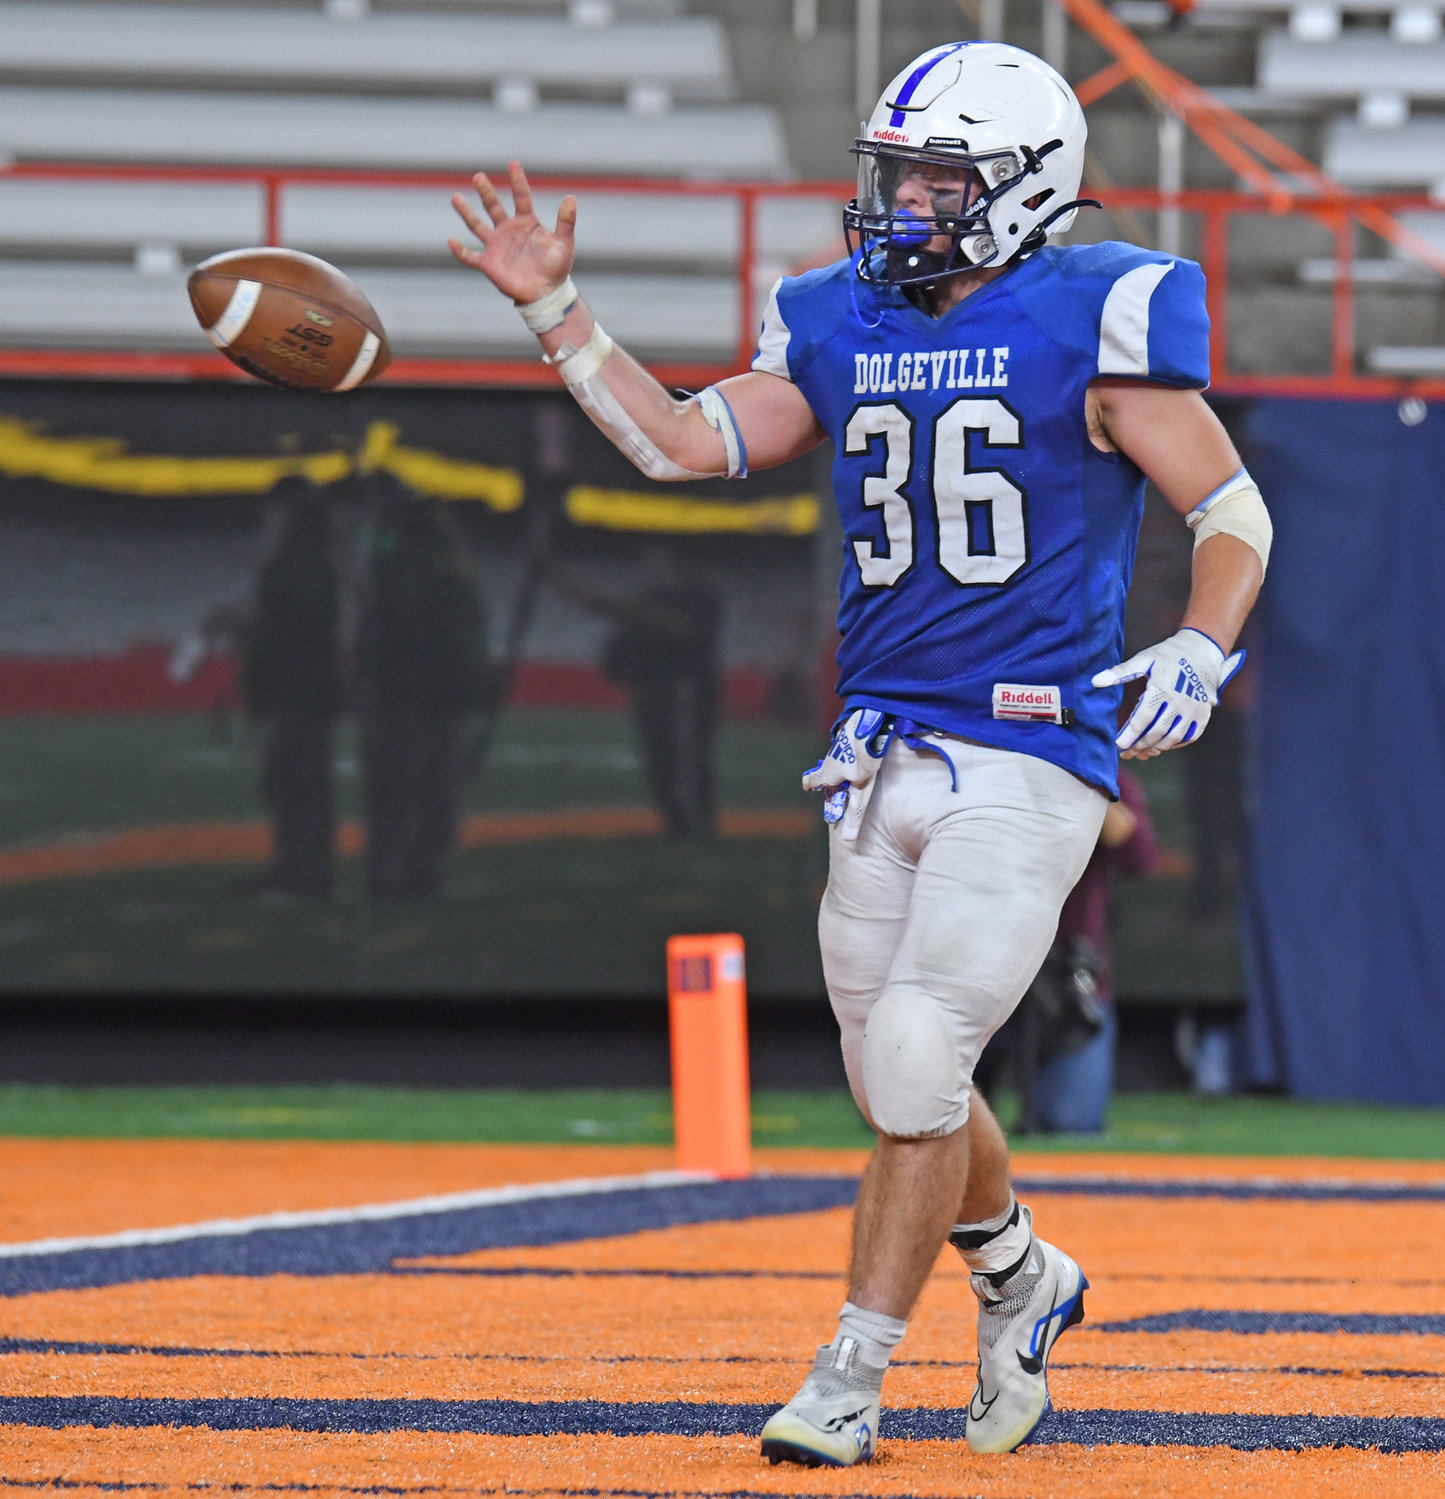 Dolgeville's Jared Bilinski tosses the ball to a referee after scoring a touchdown on Friday afternoon during the Class D final at the JMA Wireless Dome in Syracuse. Bilinski totaled four rushing touchdowns in the Blue Devils' 44-24 victory over Beaver River